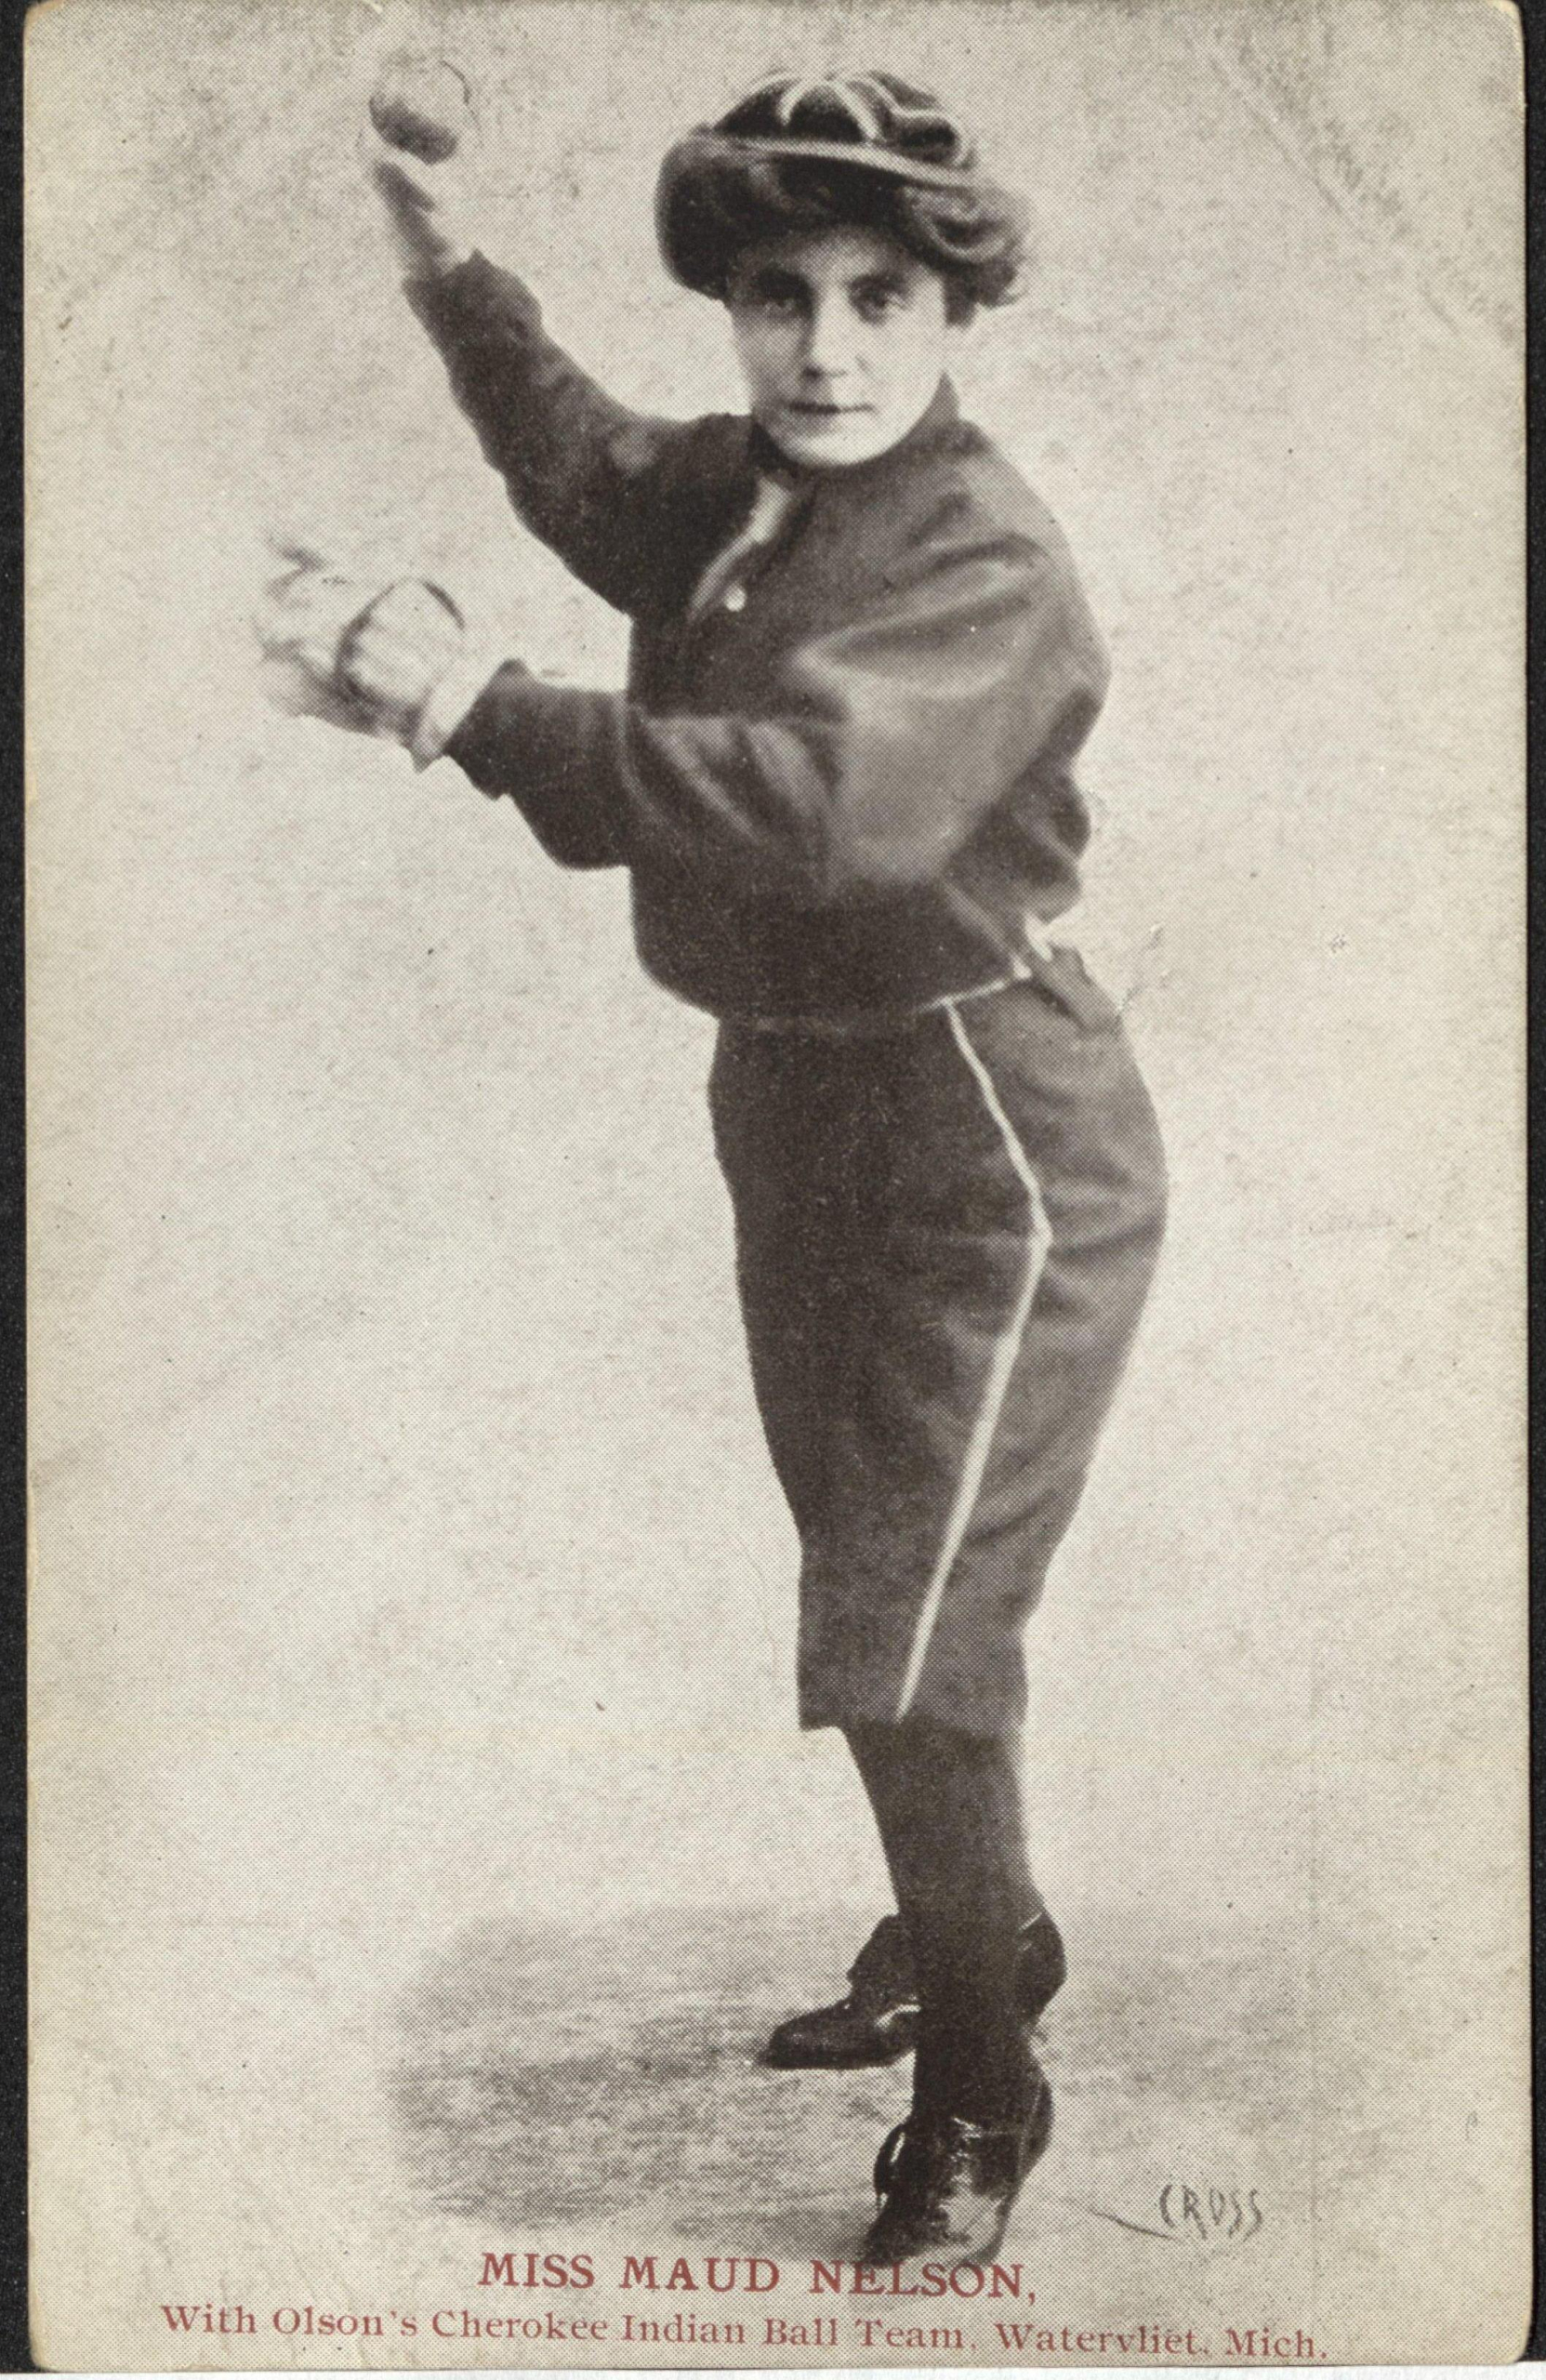 Maud Nelson (SABR-Rucker Archive)